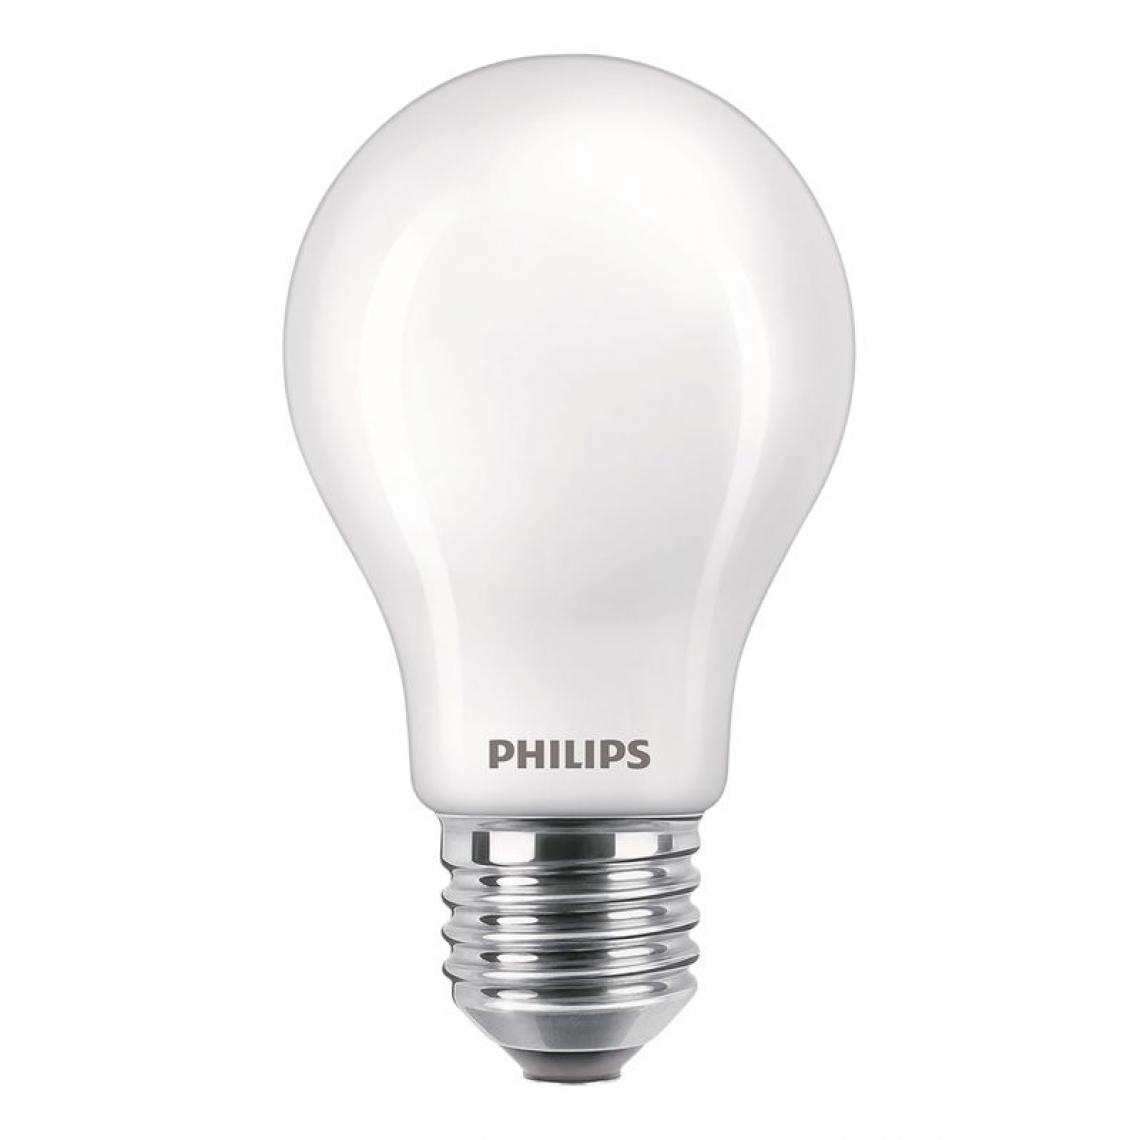 Philips - PHILIPS LED Classic 100W Standard E27 Blanc Froid Dépolie Non Dimmable - Ampoules LED